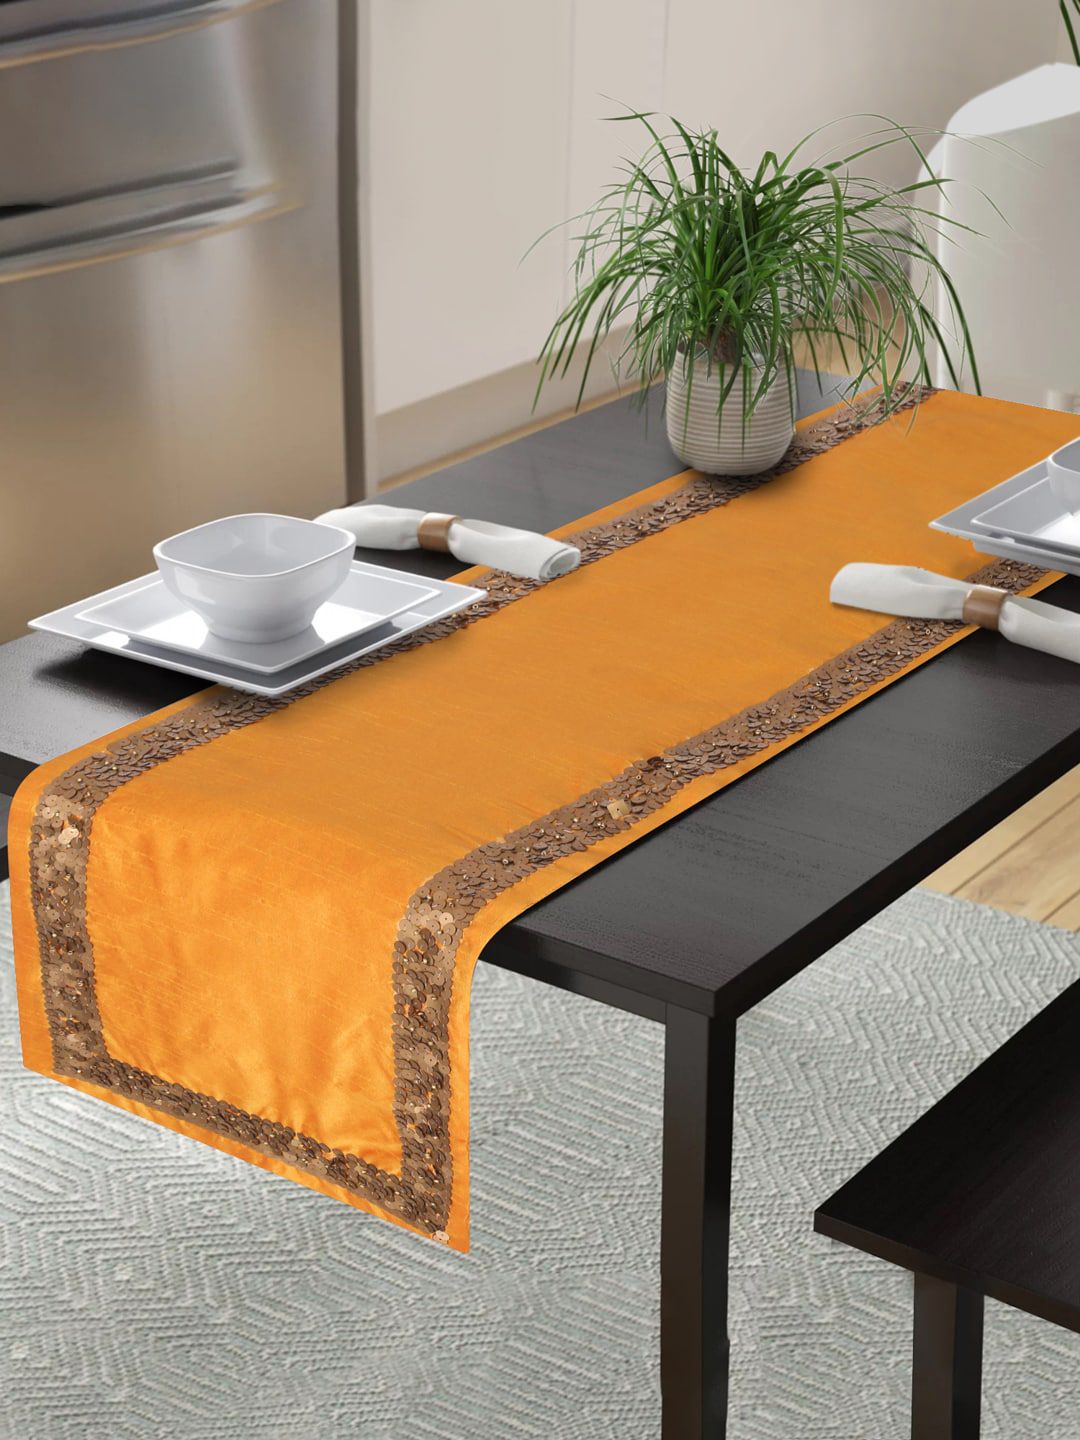 Alina decor Yellow Embellished Table Runner Price in India